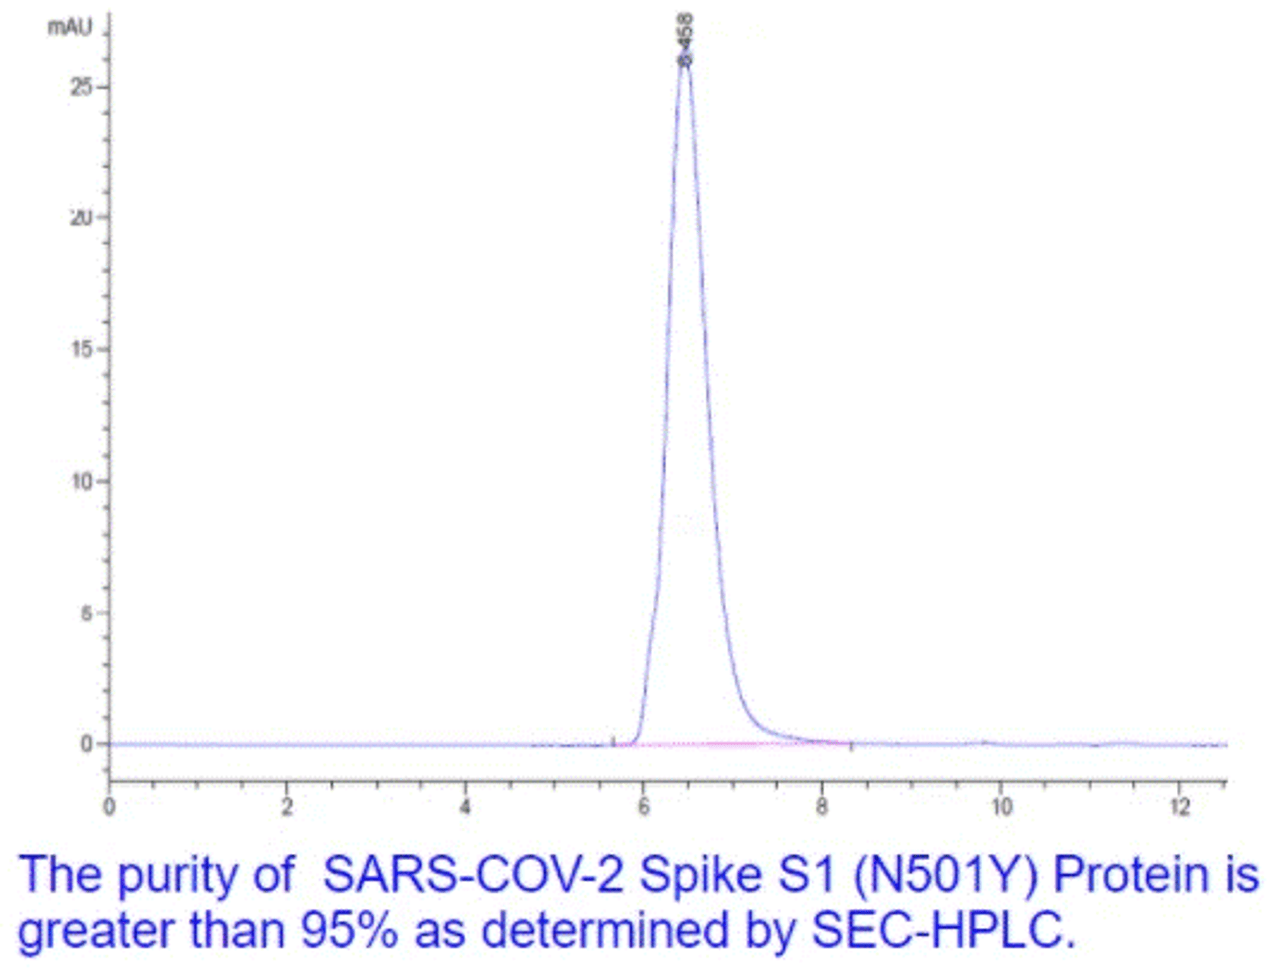 The purity of SARS-COV-2 S protein Spike S1 (N501Y) is greater than 95% as determiend by SEC-HPLC.